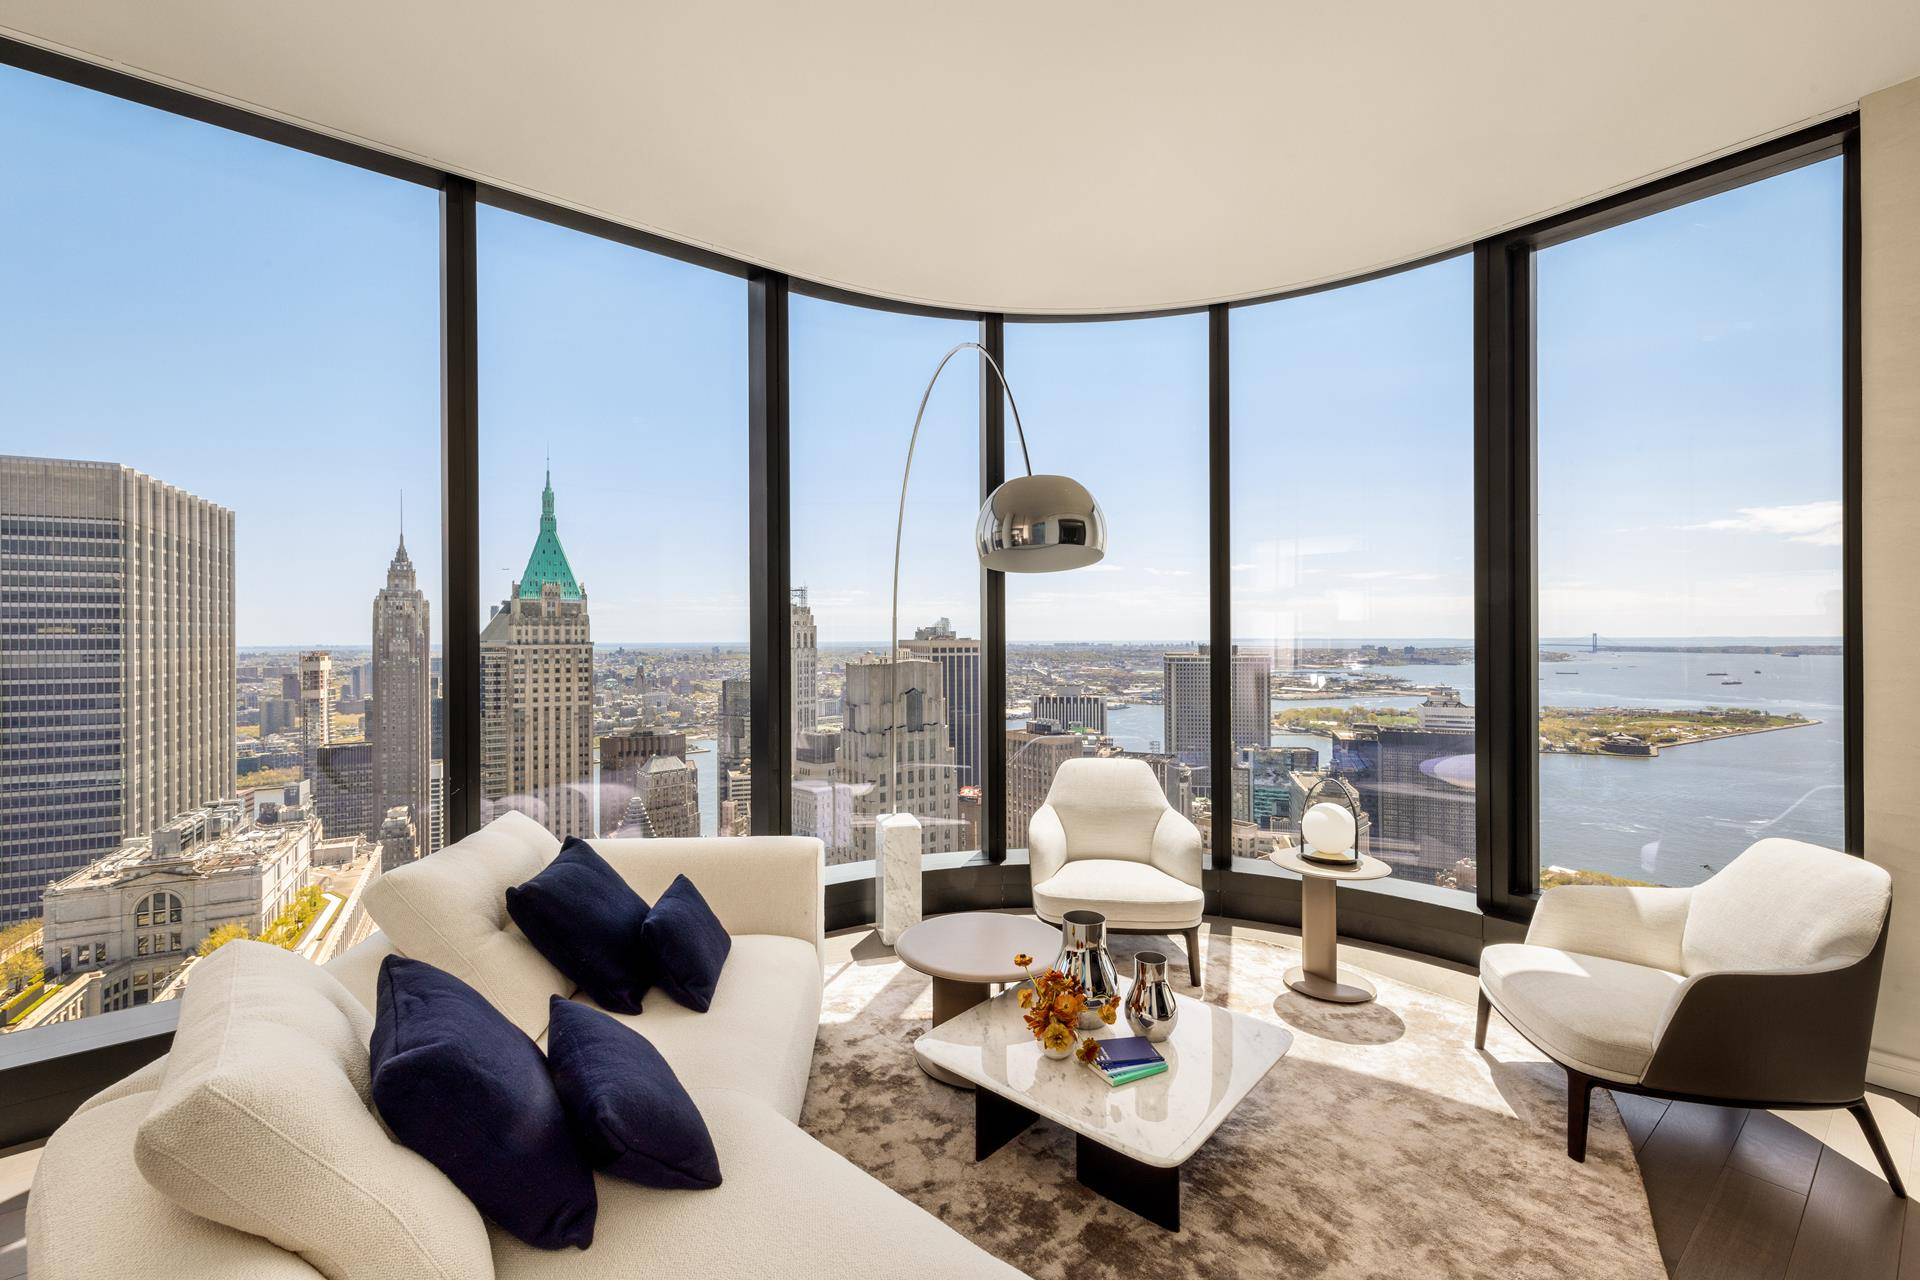 Welcome to Residence 63B at The Greenwich by Rafael Vi oly, a one bedroom, one and a half bathroom boasting stunning southern and eastern exposures with panoramic views of the ...